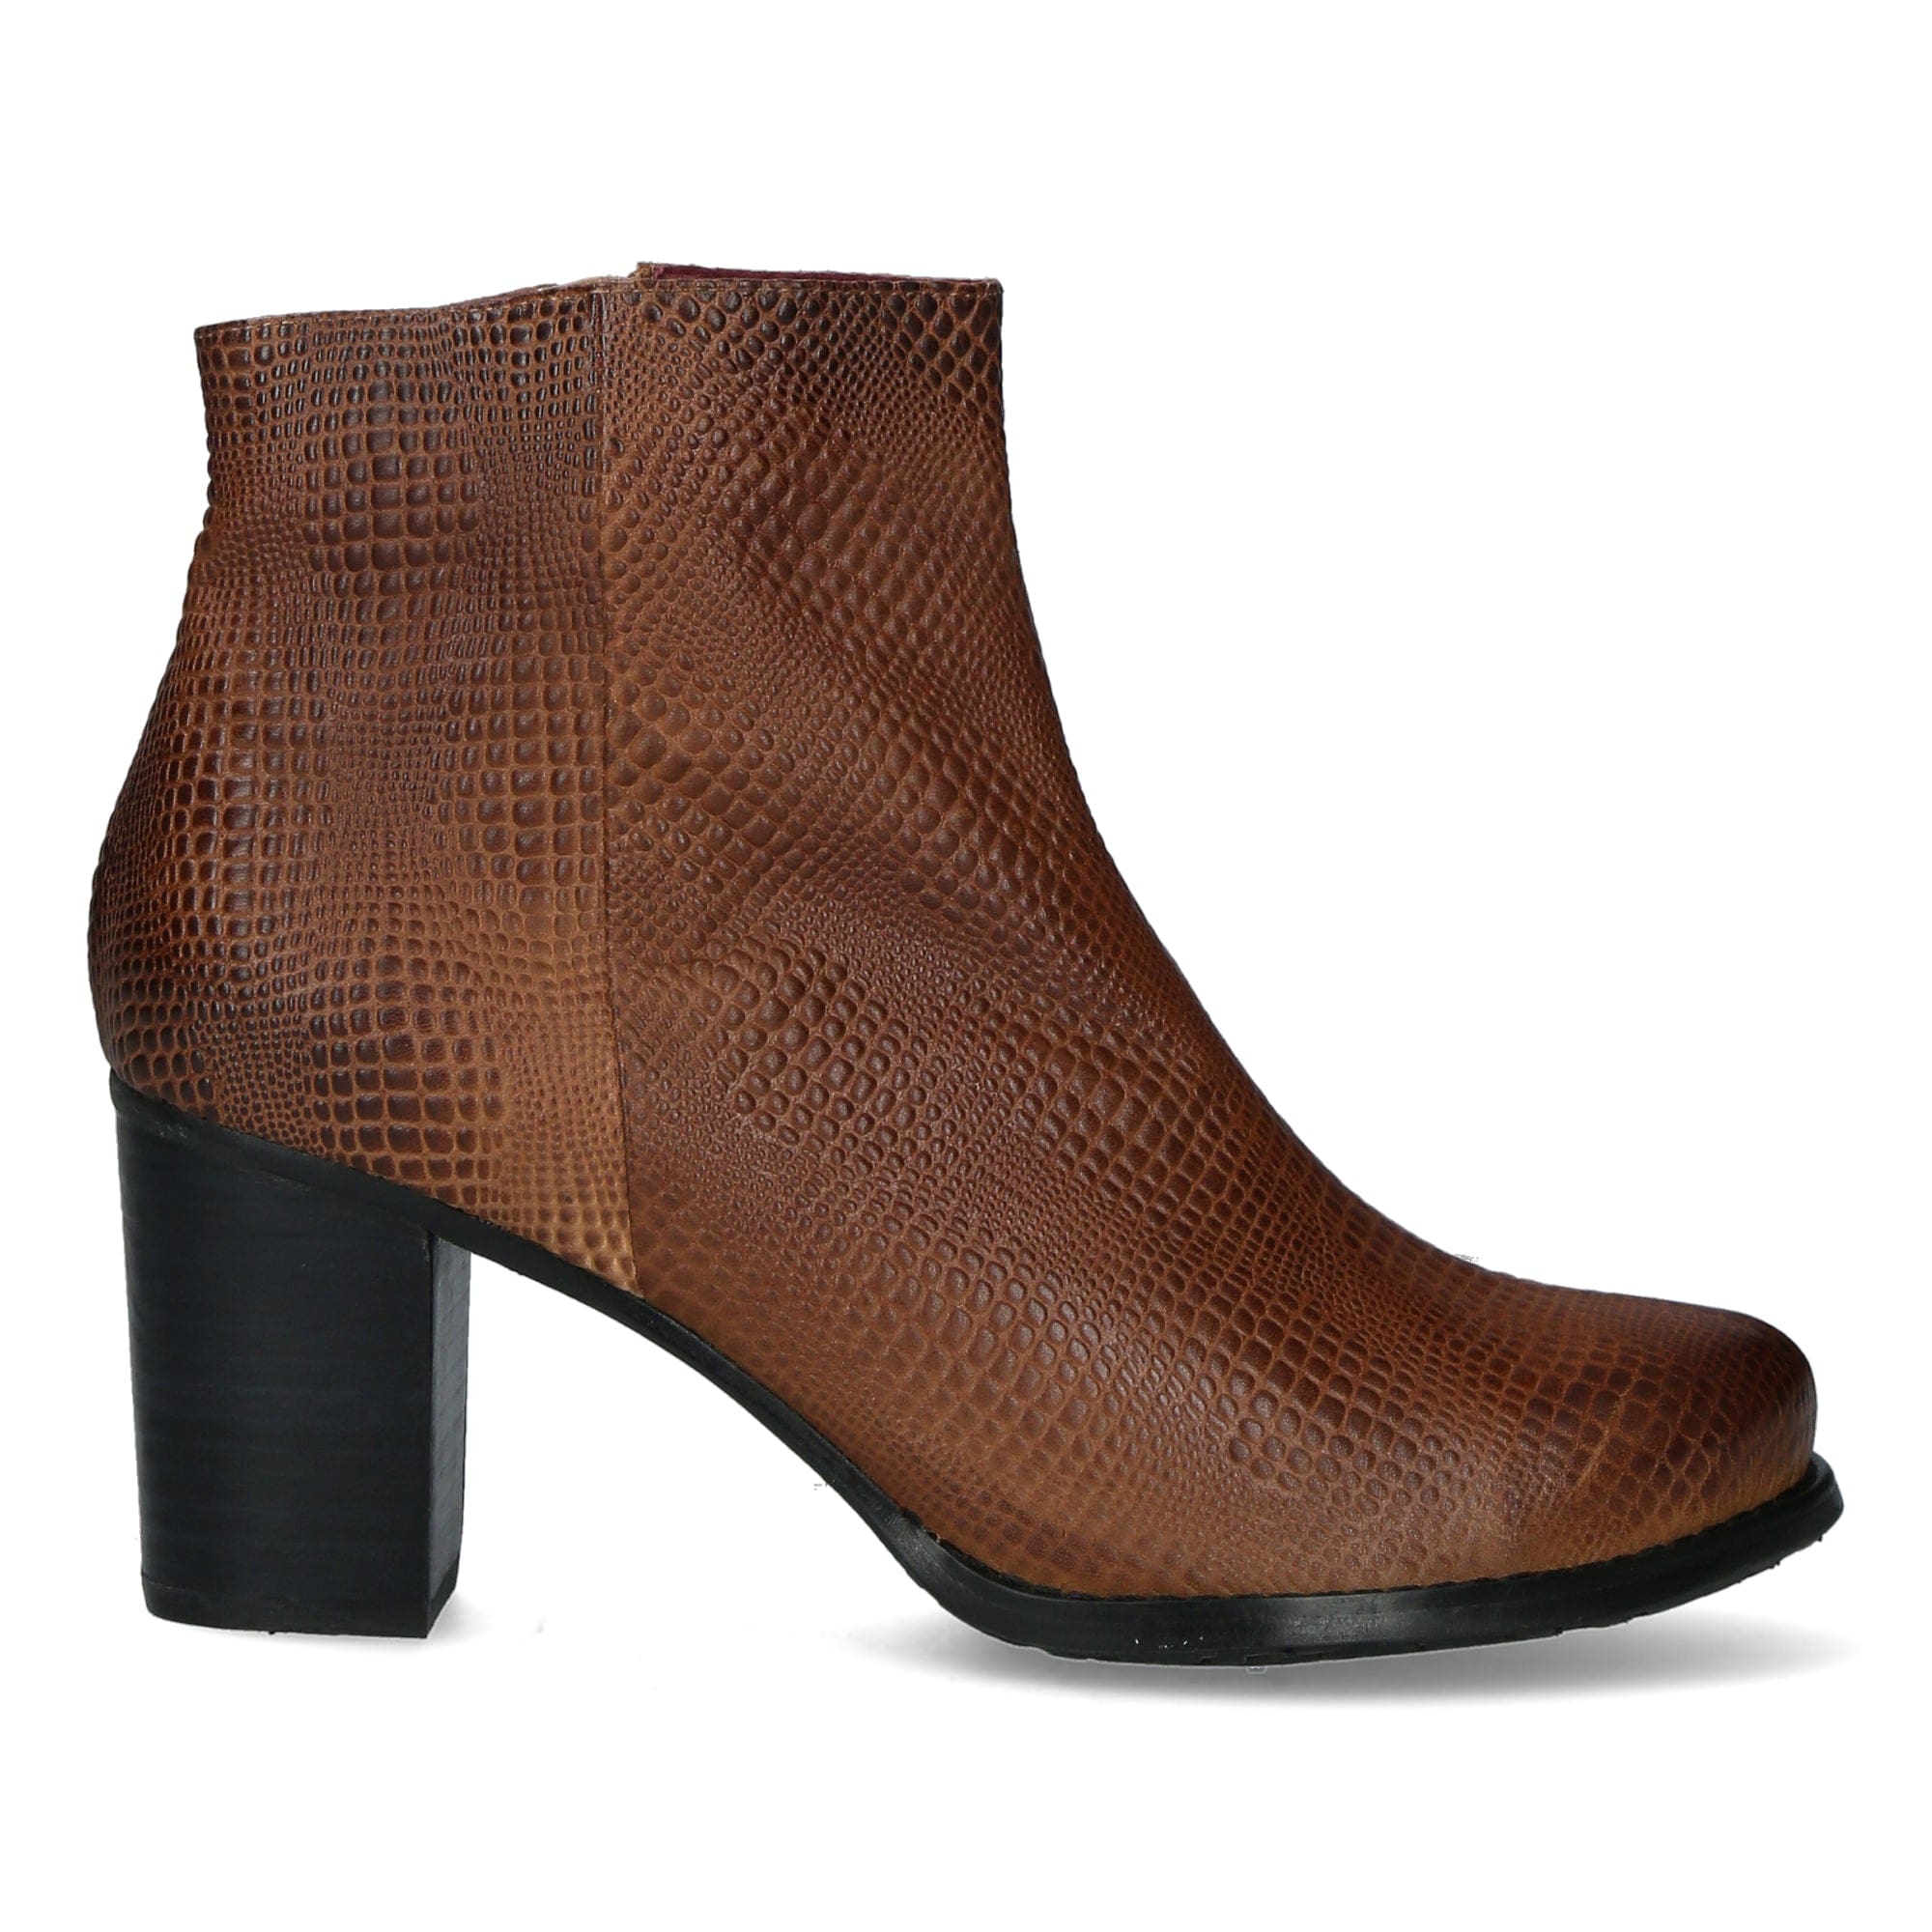 MARENA Shoes - 35 / Expresso - Buty